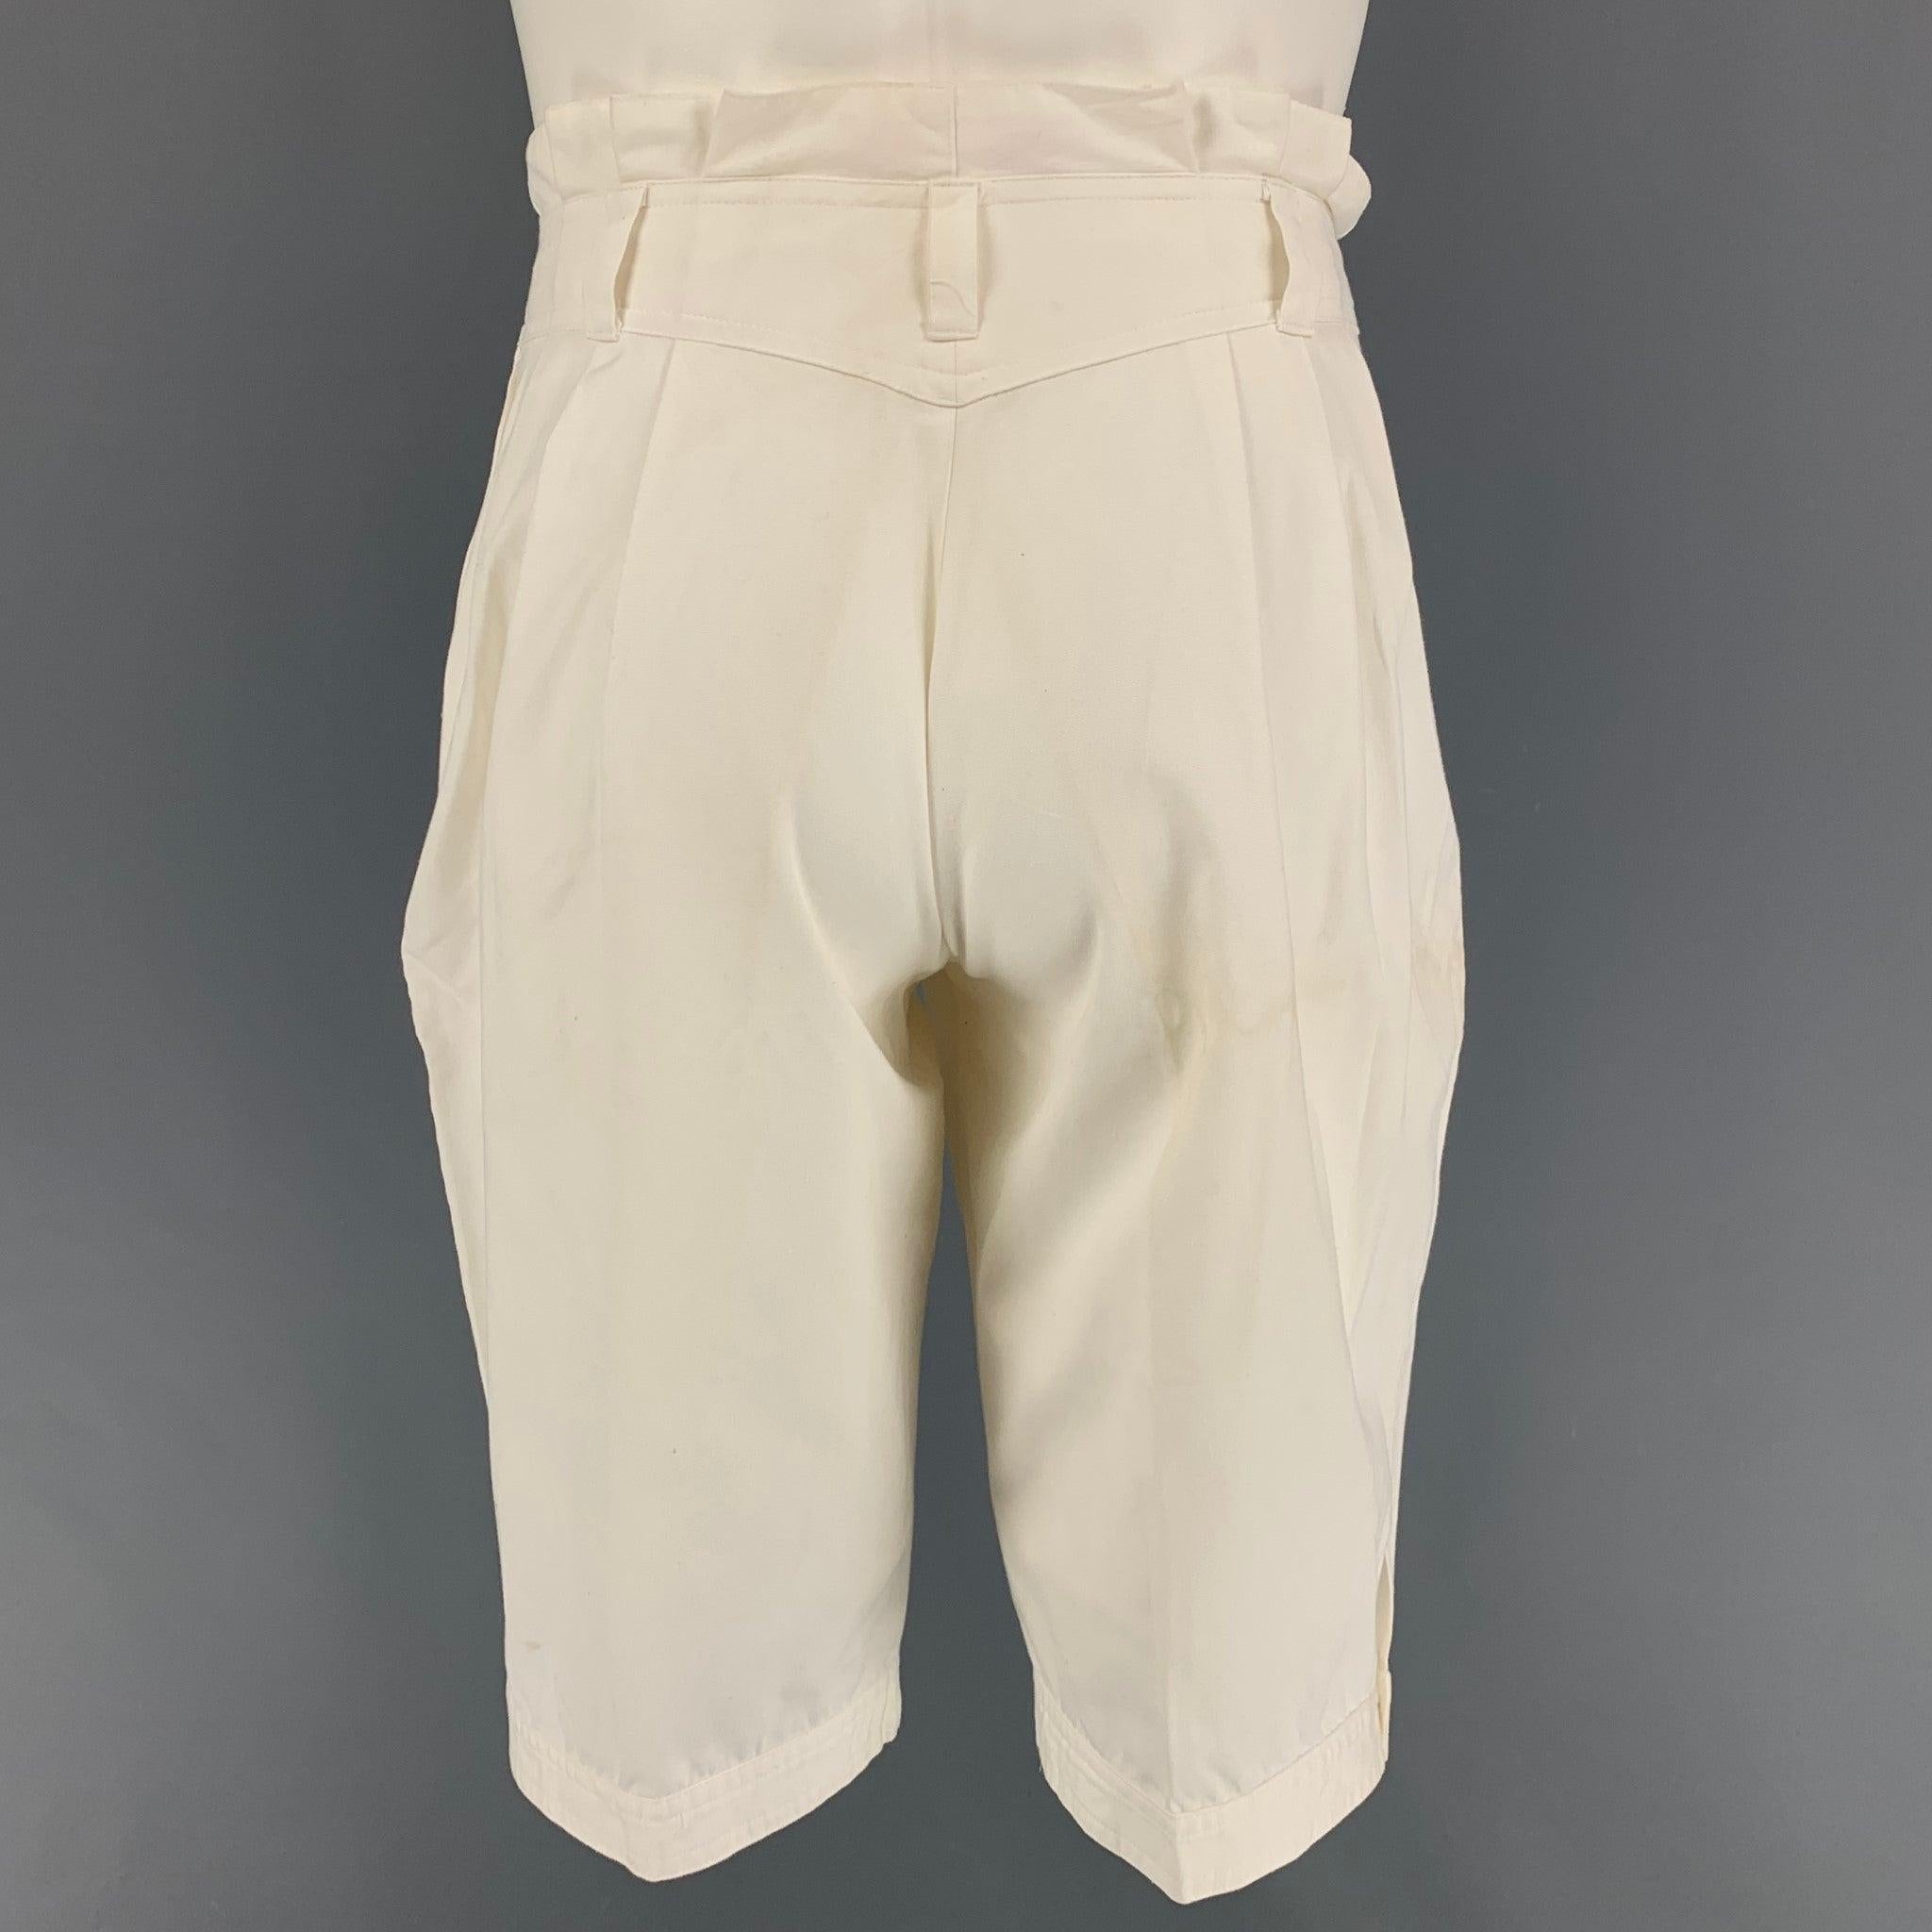 Vintage KANSAI YAMAMOTO shorts comes in a white cotton featuring a pleated style, ruffled trim, snap button details, zip fly, and a double snap button closure. Made in Japan.
Good Pre-Owned Condition. Minor mark at leg.  

Marked:   28